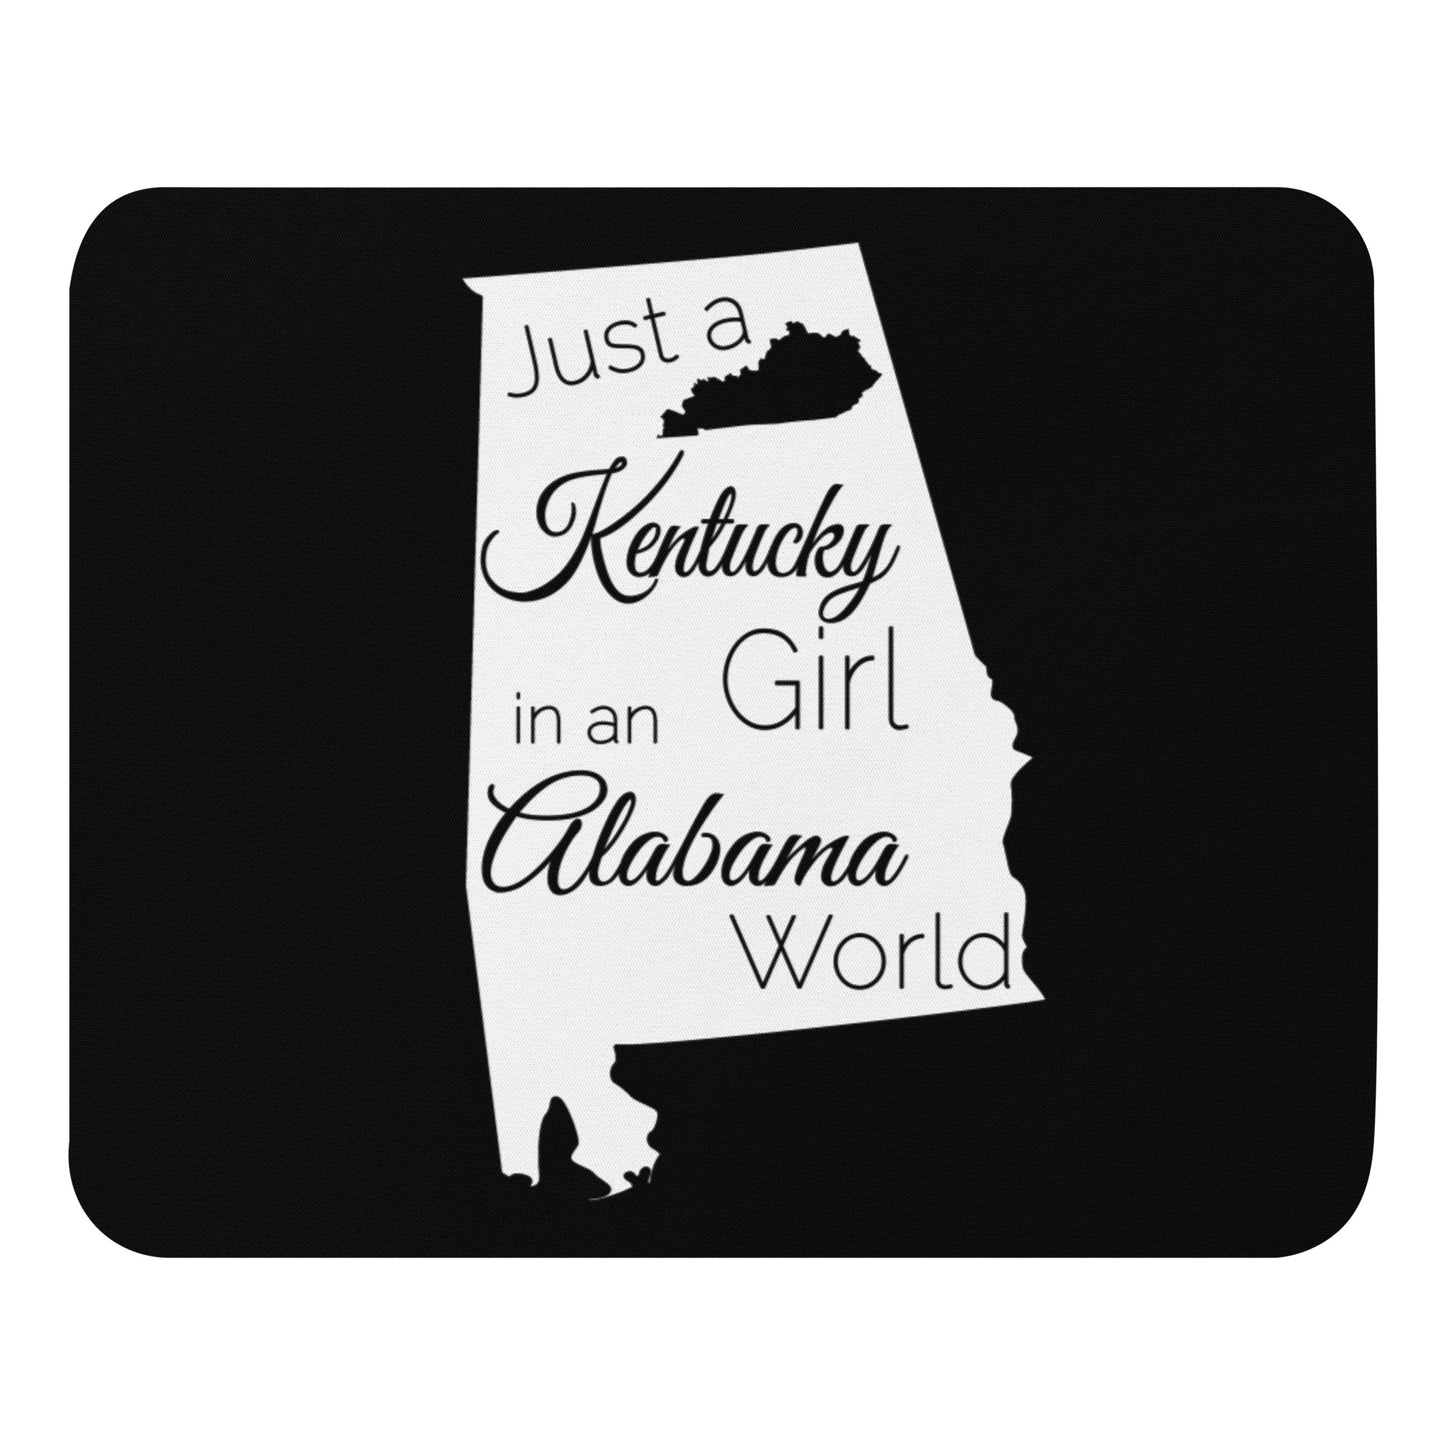 Just a Kentucky Girl in an Alabama World Mouse pad